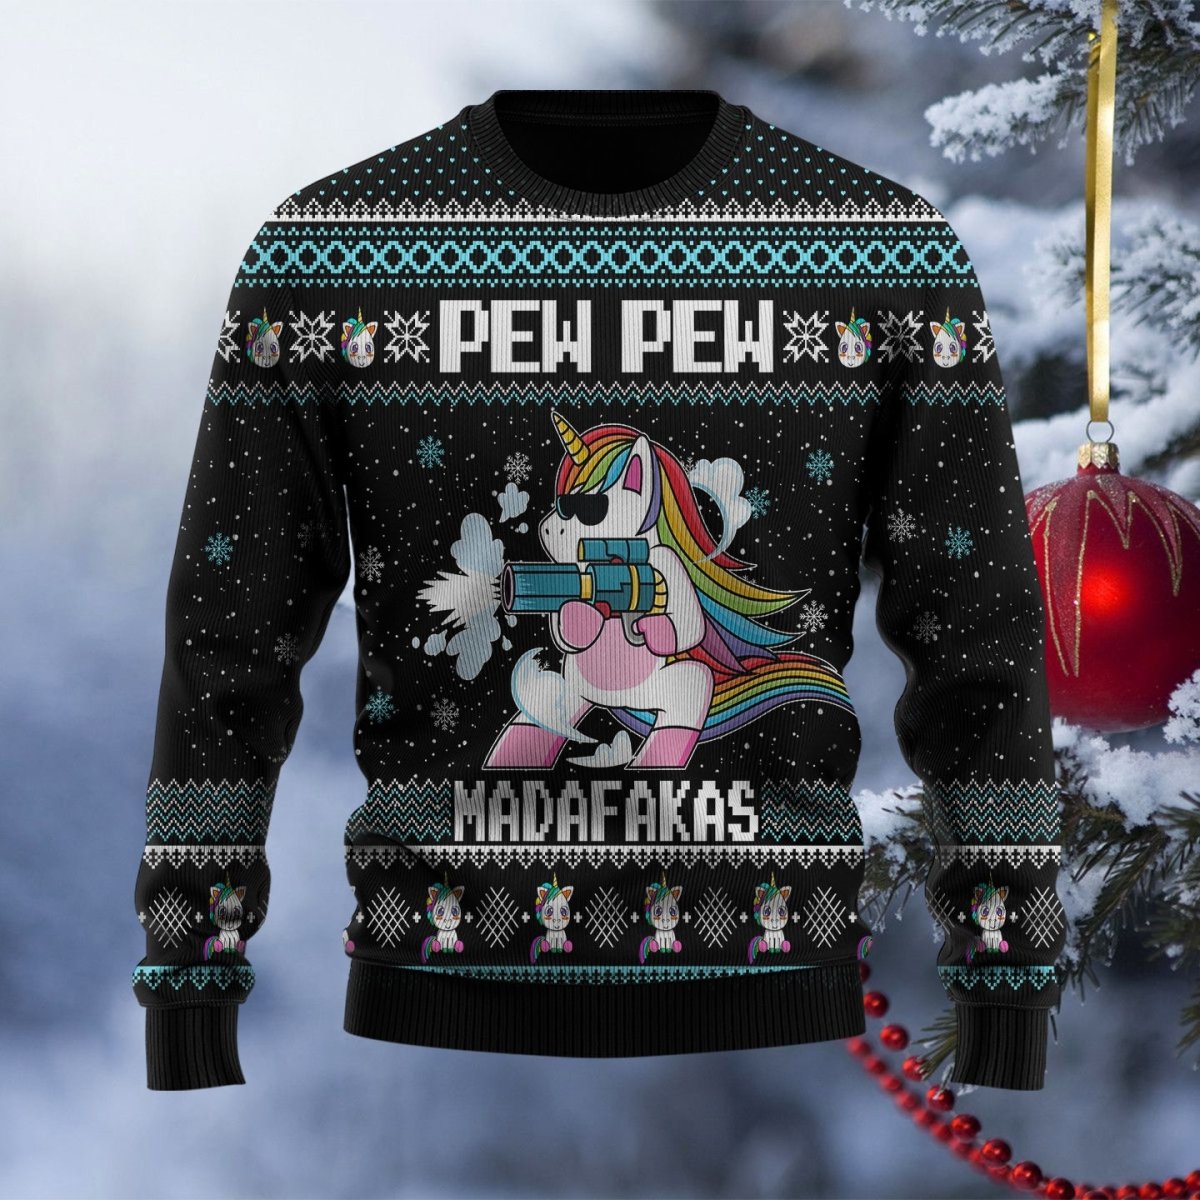 This Ugly Christmas Sweater features a whimsical design of a unicorn spraying a shower of Christmas lights - perfect for any ugly sweater party - Giftago - 1